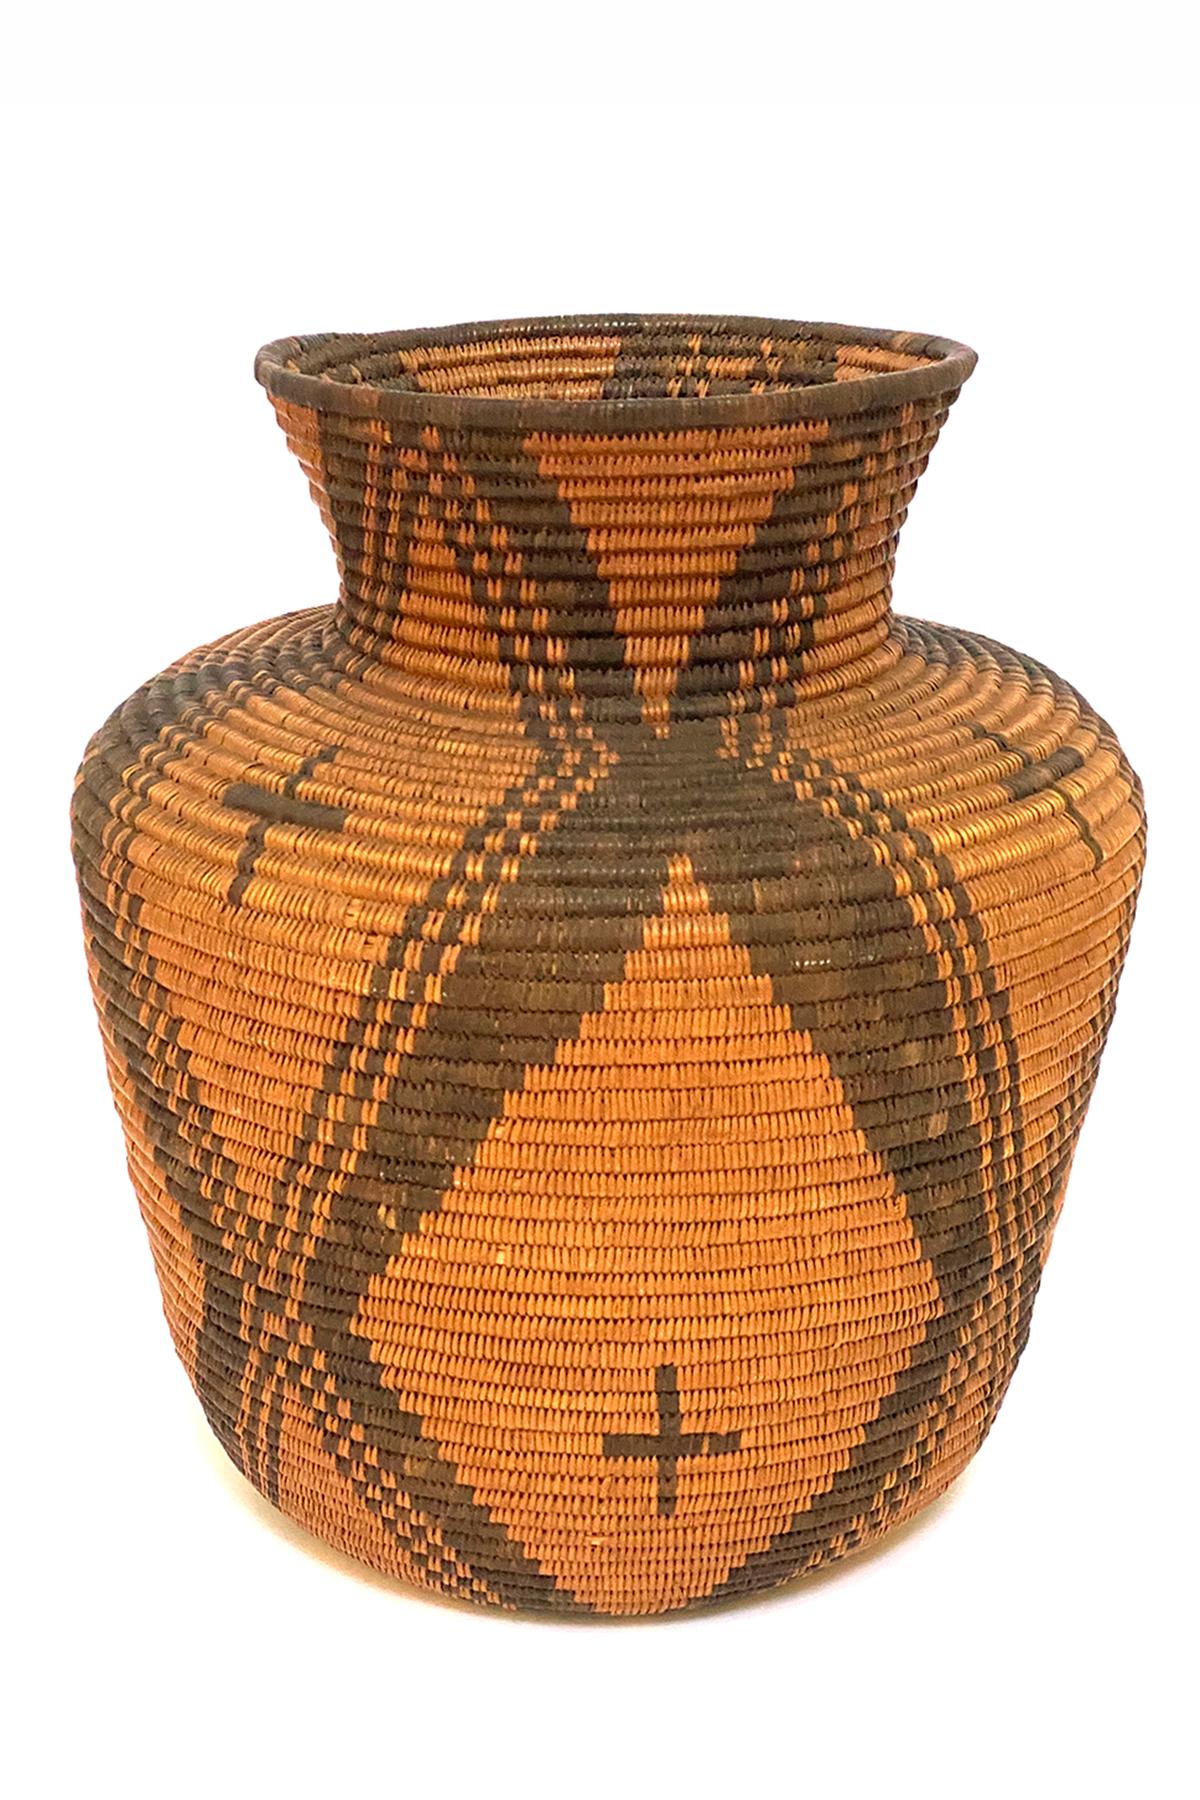 Apache Basketry Olla with Crosses, woven of natural fibers, willow with devil's claw, circa 1910. The basket measures 12 ¼ height x 9 inches diameter. The Apache, a nomadic tribe, ranged across the American Southwest including areas of Arizona,